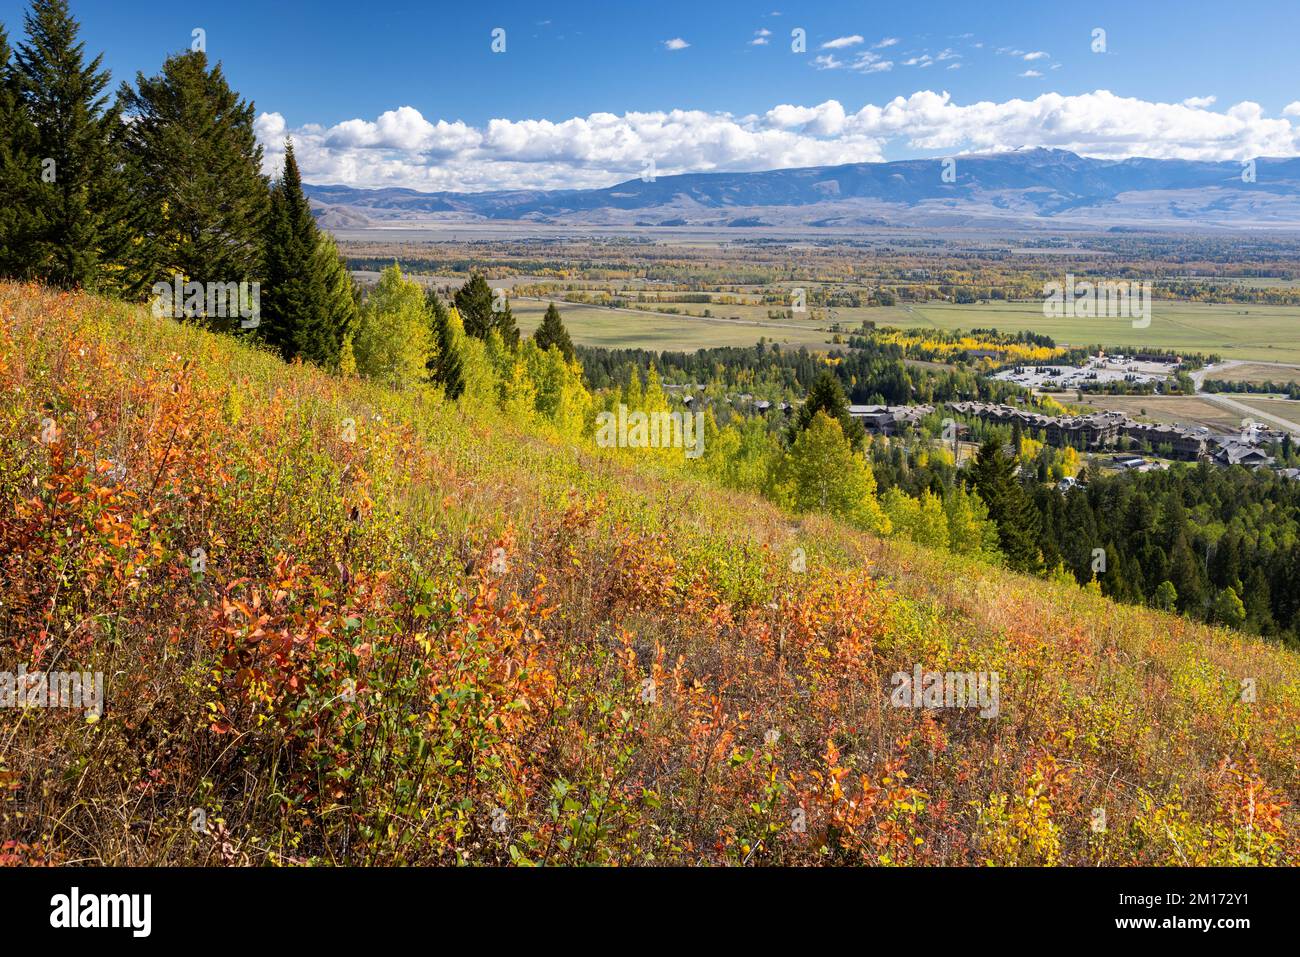 The valley of Jackson Hole stretching out below the Saratoga Trail at Jackson Hole Mountain Resort. Bridger-Teton National Forest, Wyoming Stock Photo